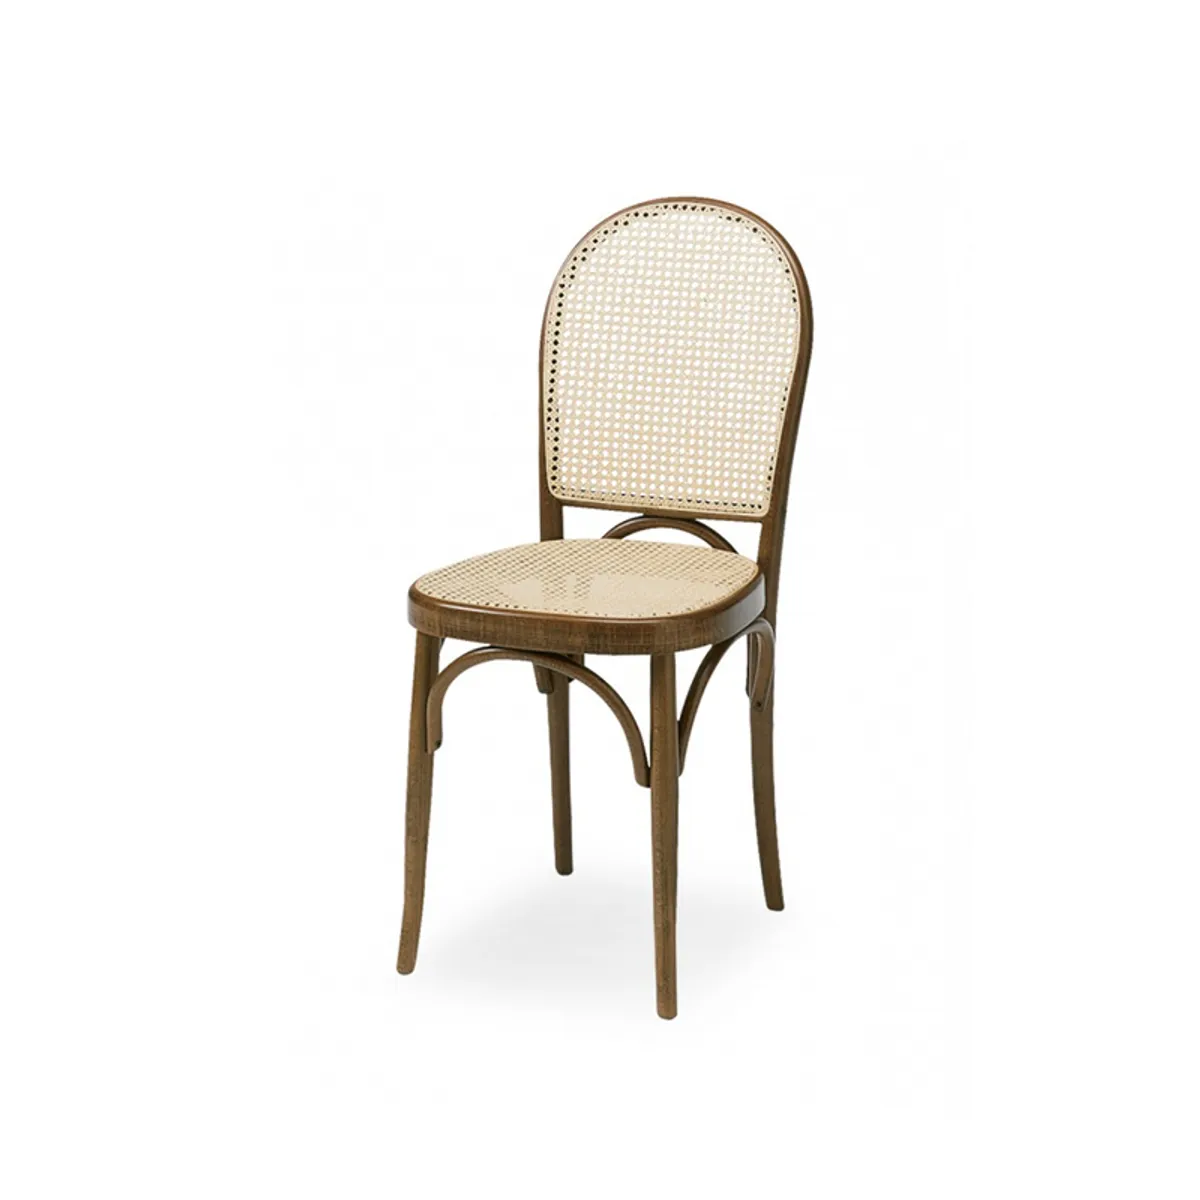 Corti Side Chair Wood And Cane For Restaurants